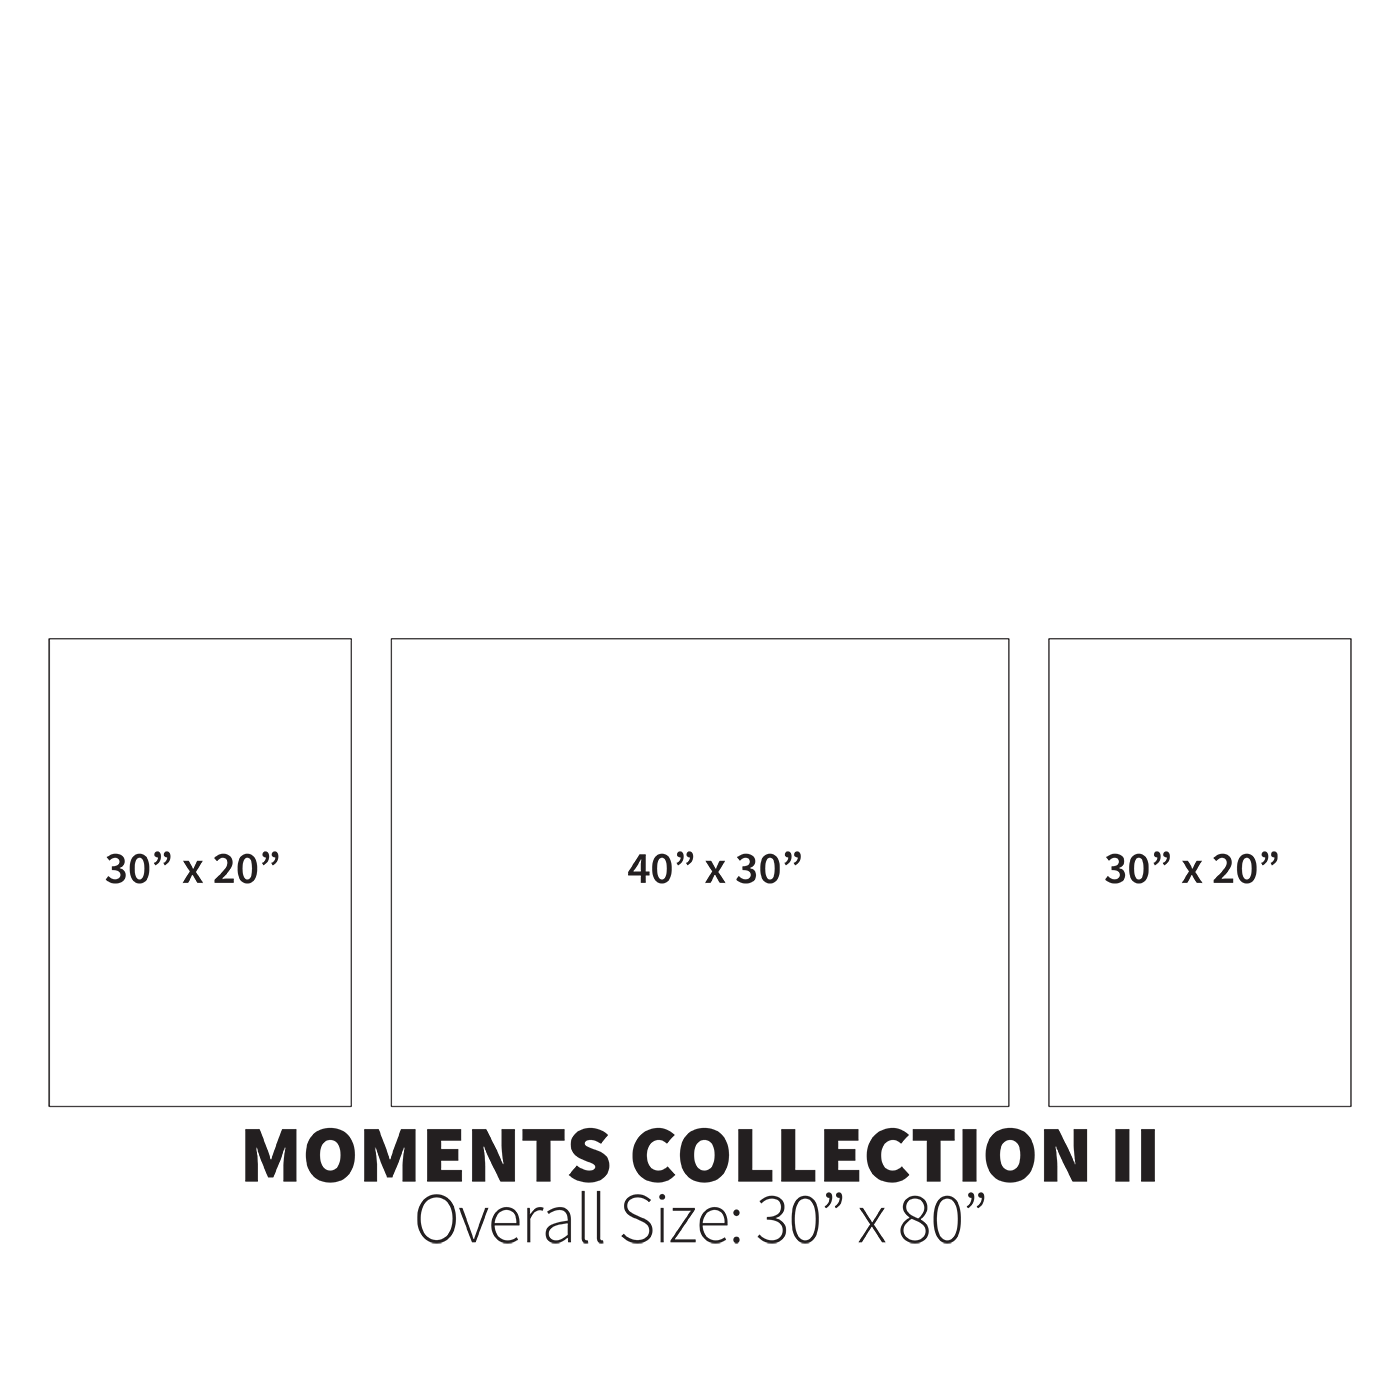 Moments Collection II (Overall Size: 30" x 80")